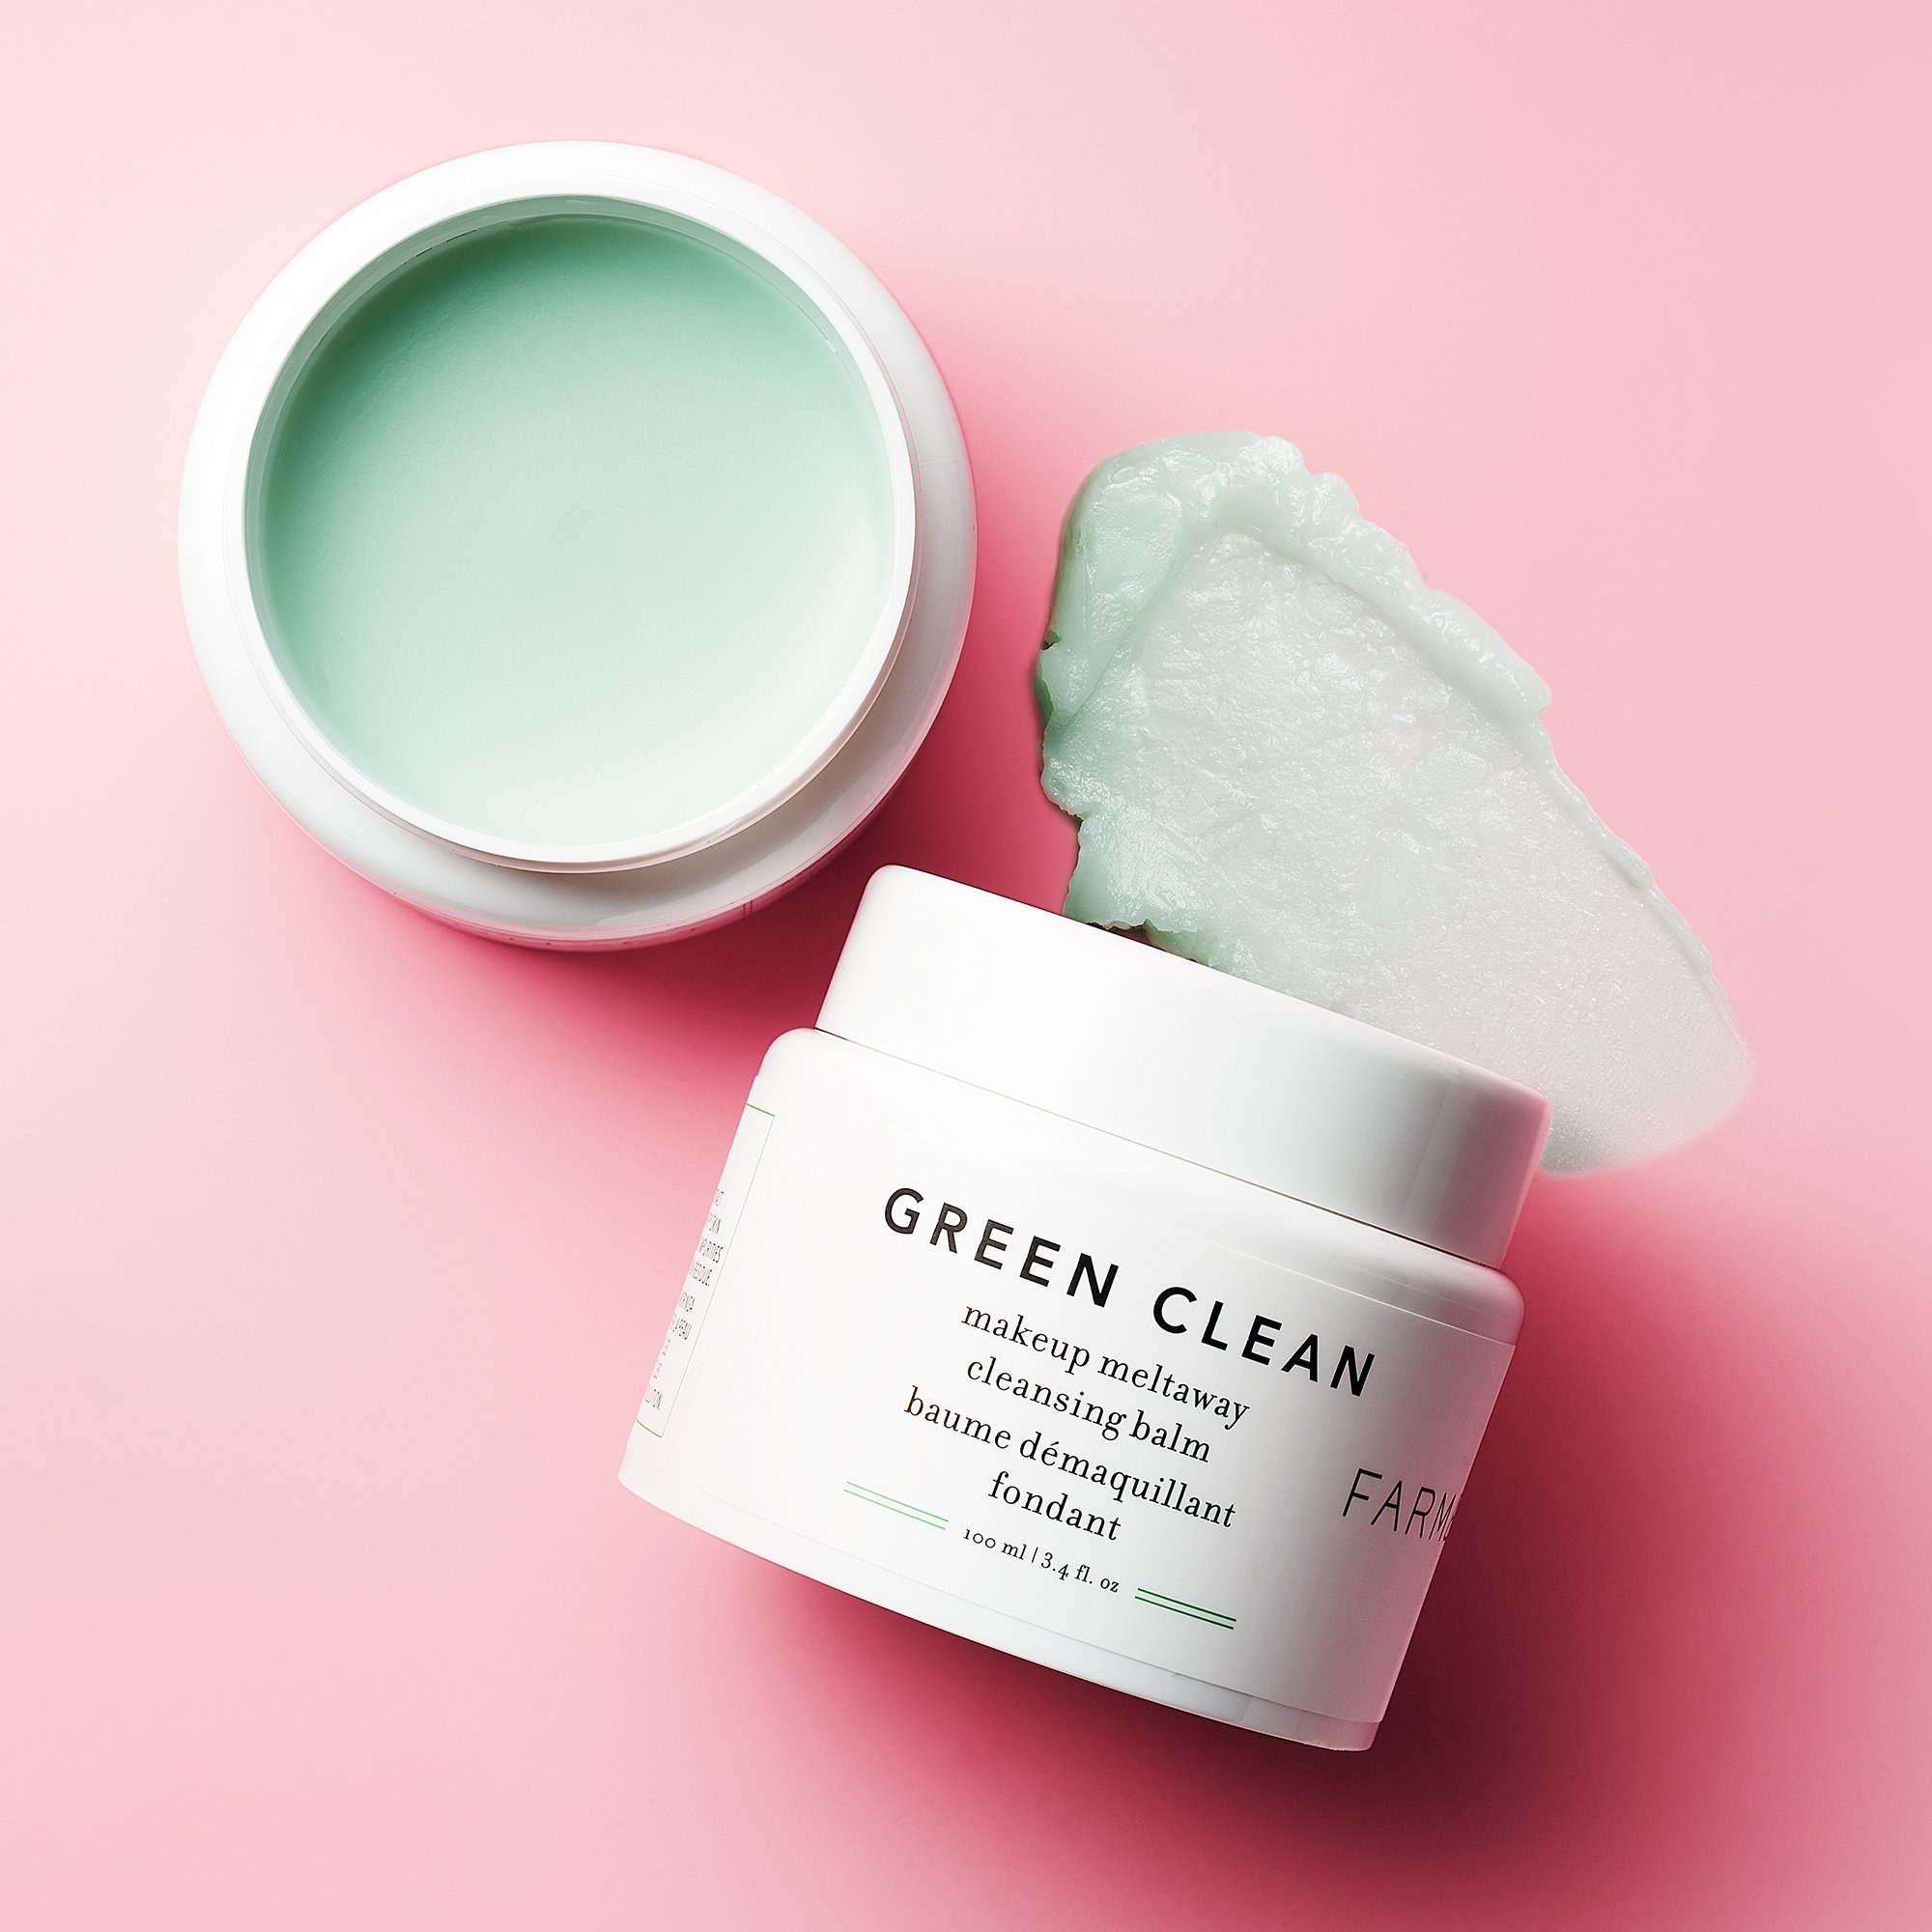 An image of the Green Clean cleanser.